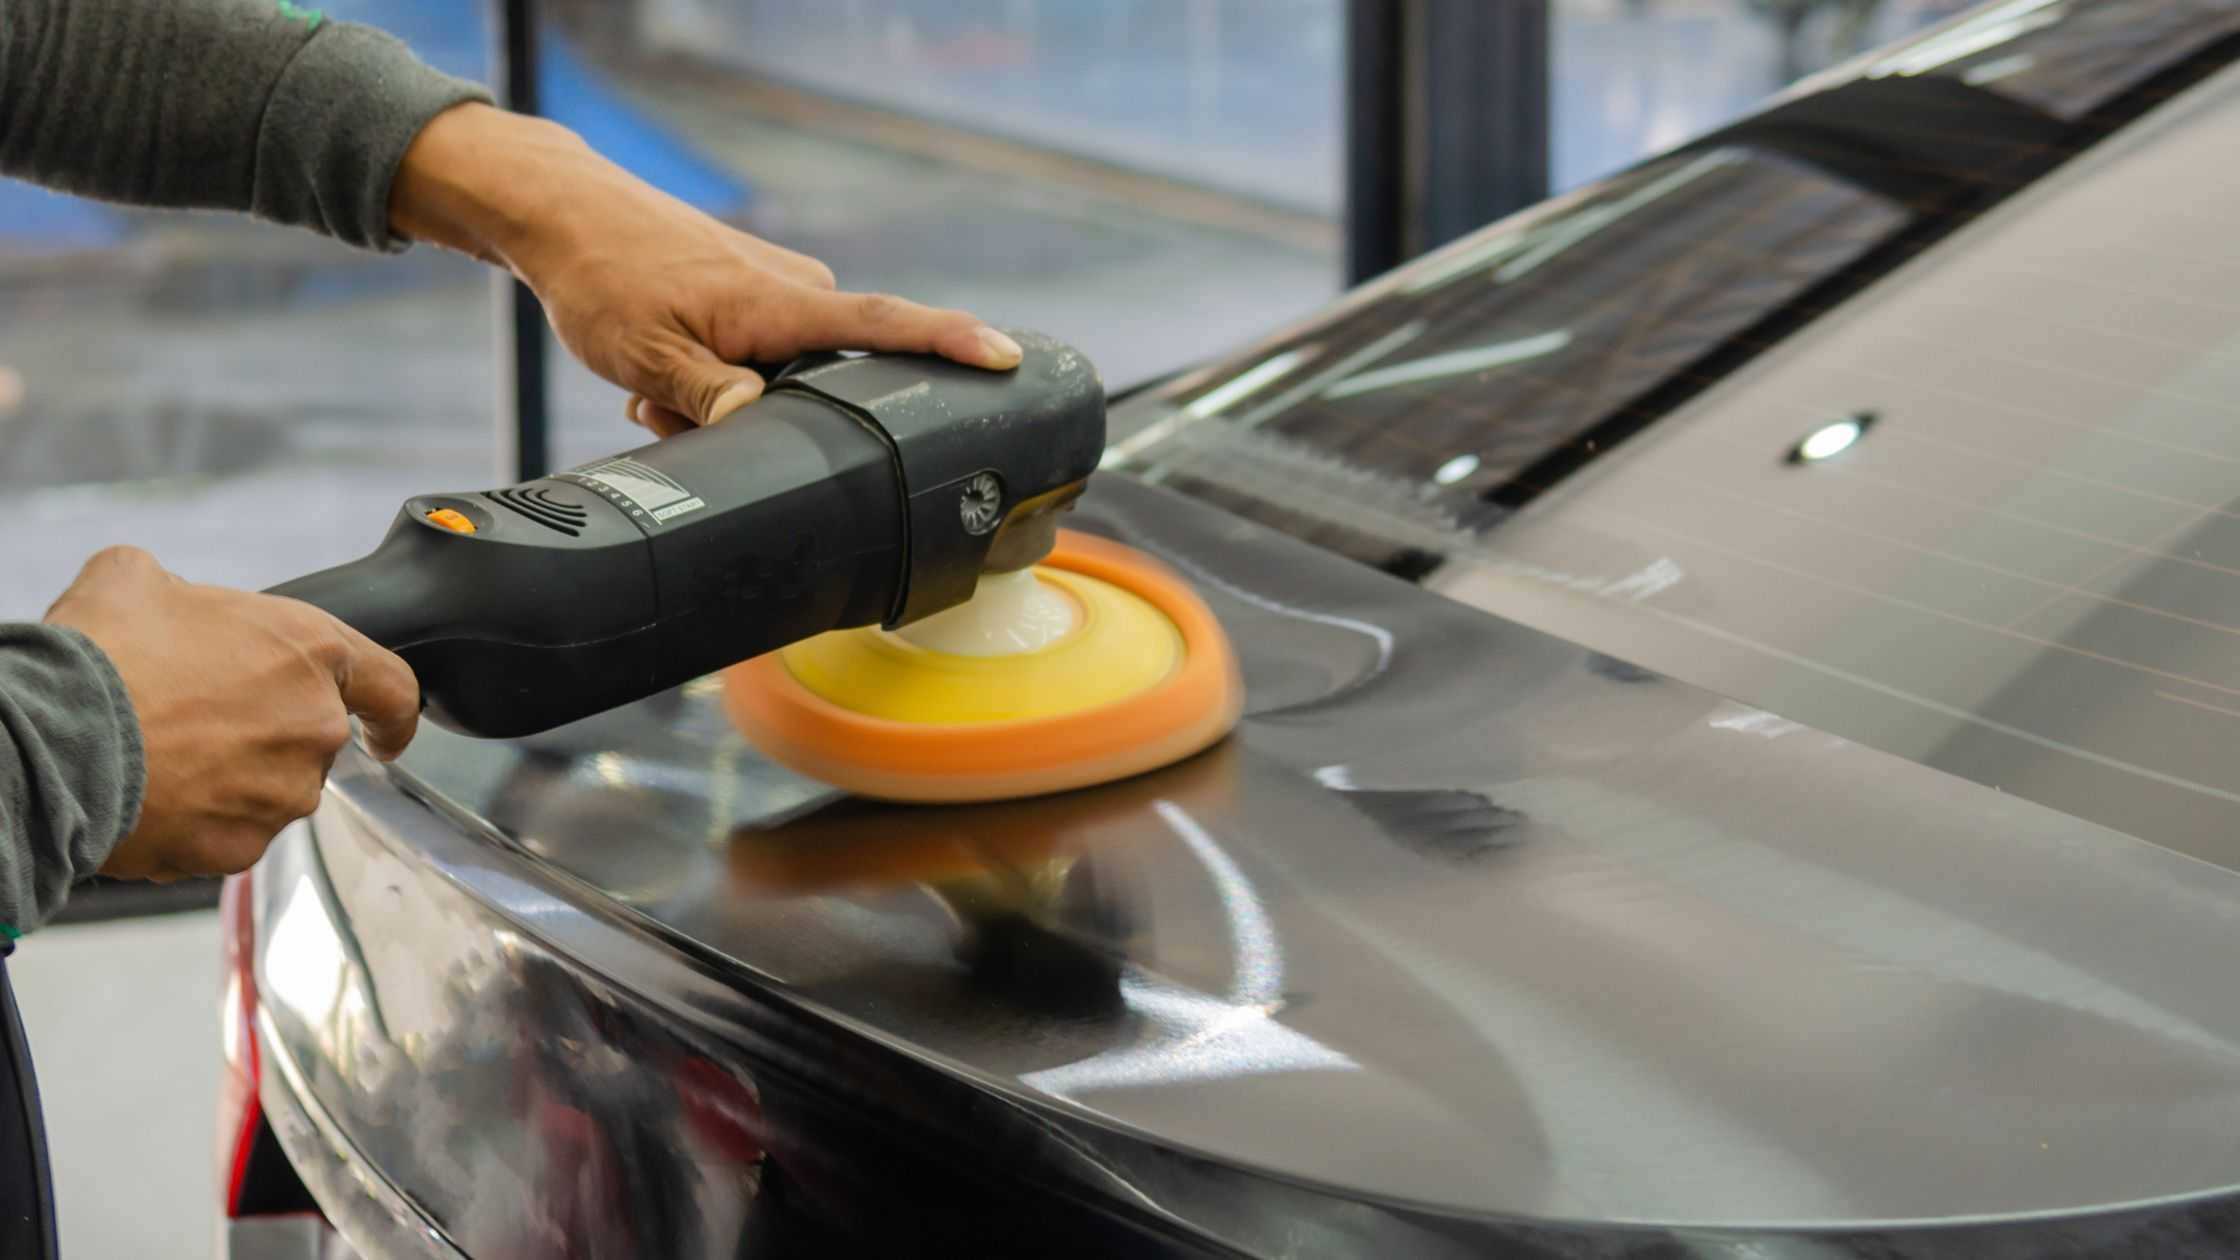 The Best Car Buffer for Scratches: Your Key to a Shiny, Scratch-Free Ride